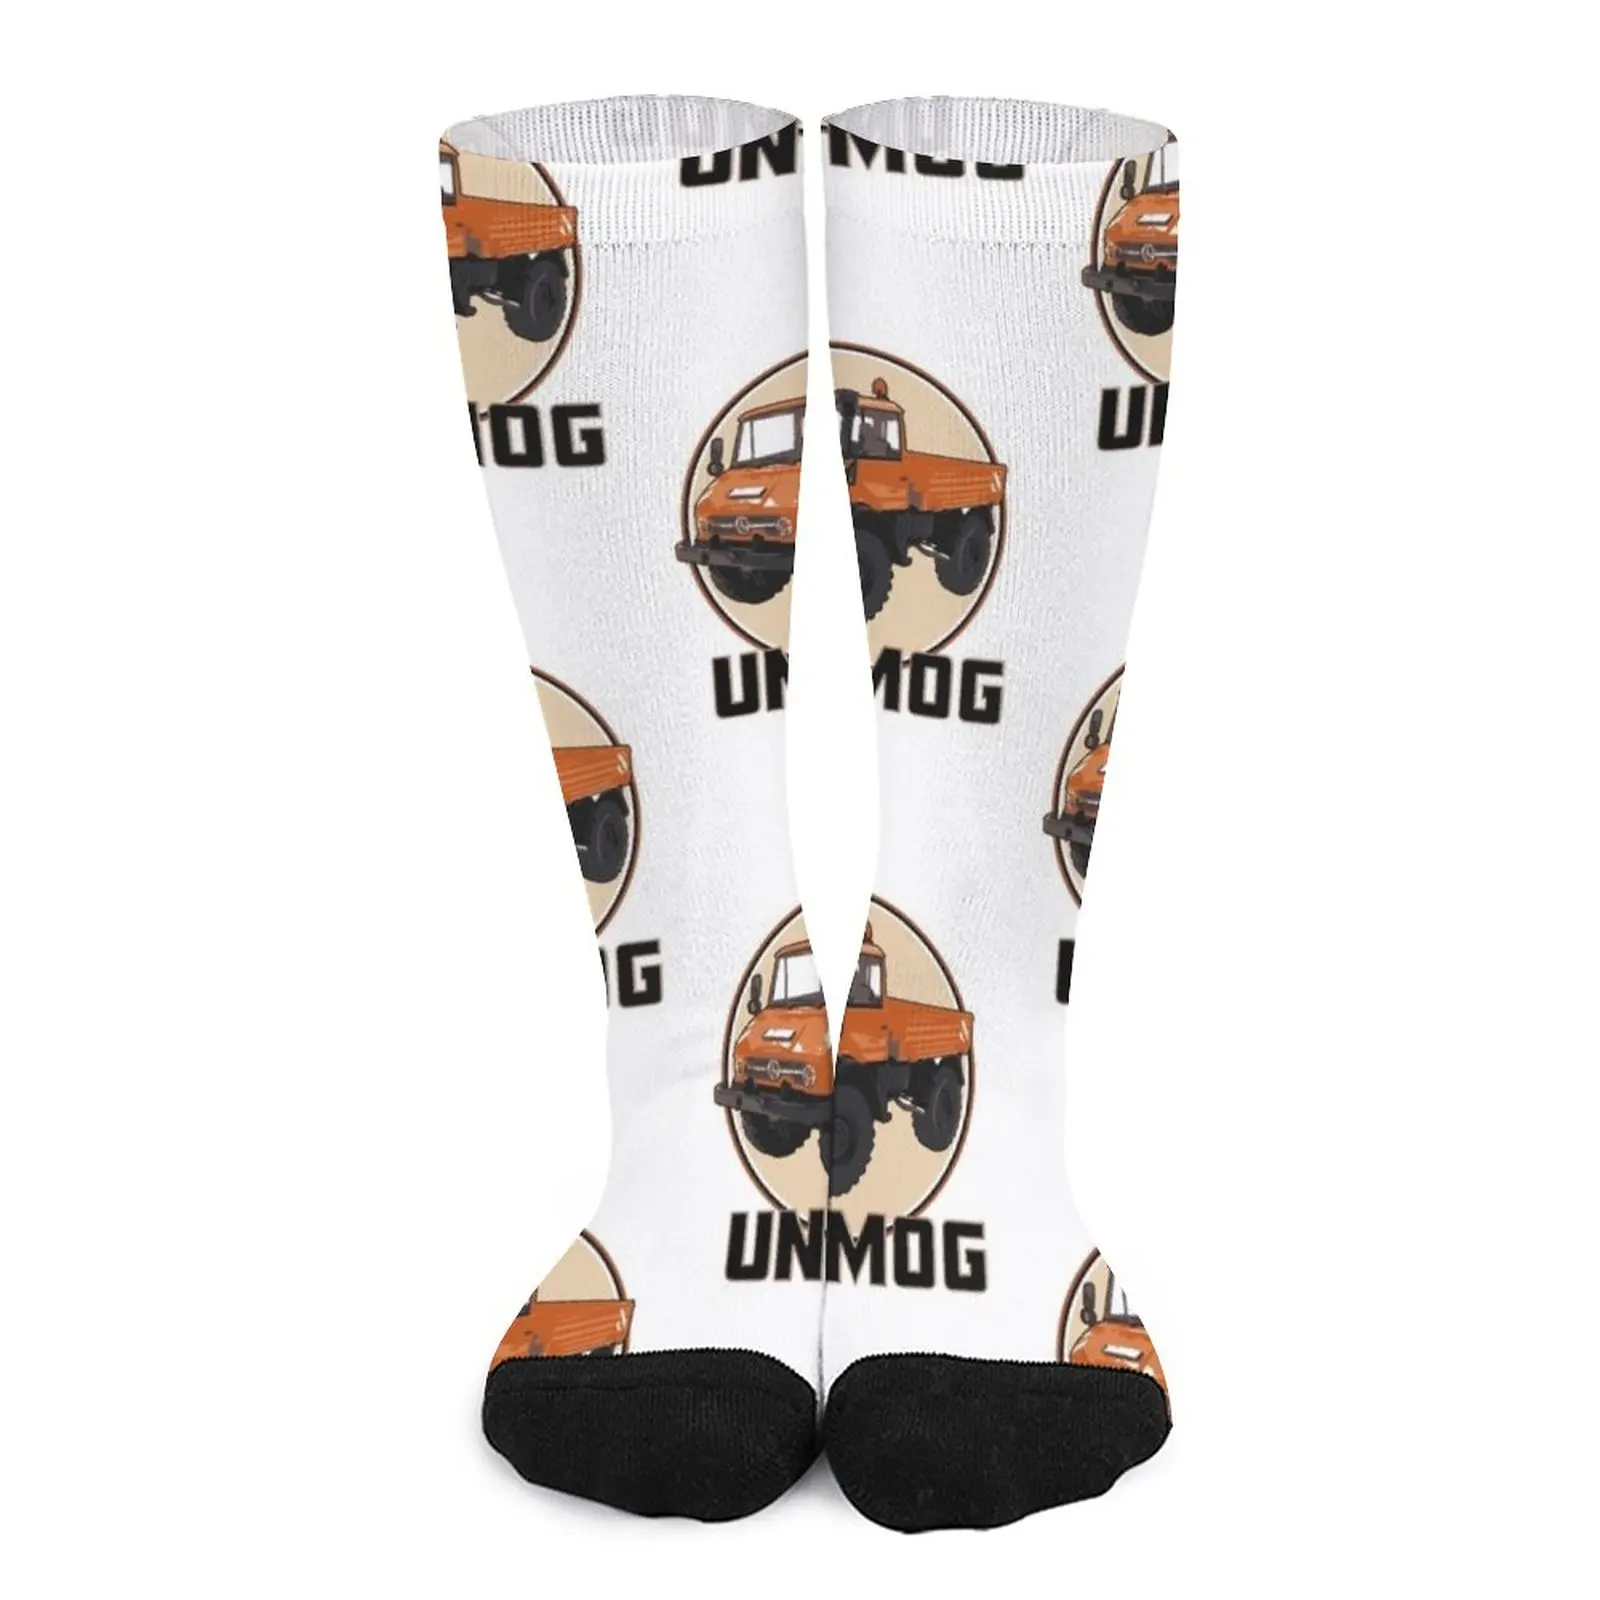 1 pair football shin guards compression calf sleeve sports shin pads soccer leg support protective gear for adult teen children UNIMOG orange Socks gift for men Women's compression sock sports and leisure cartoon socks